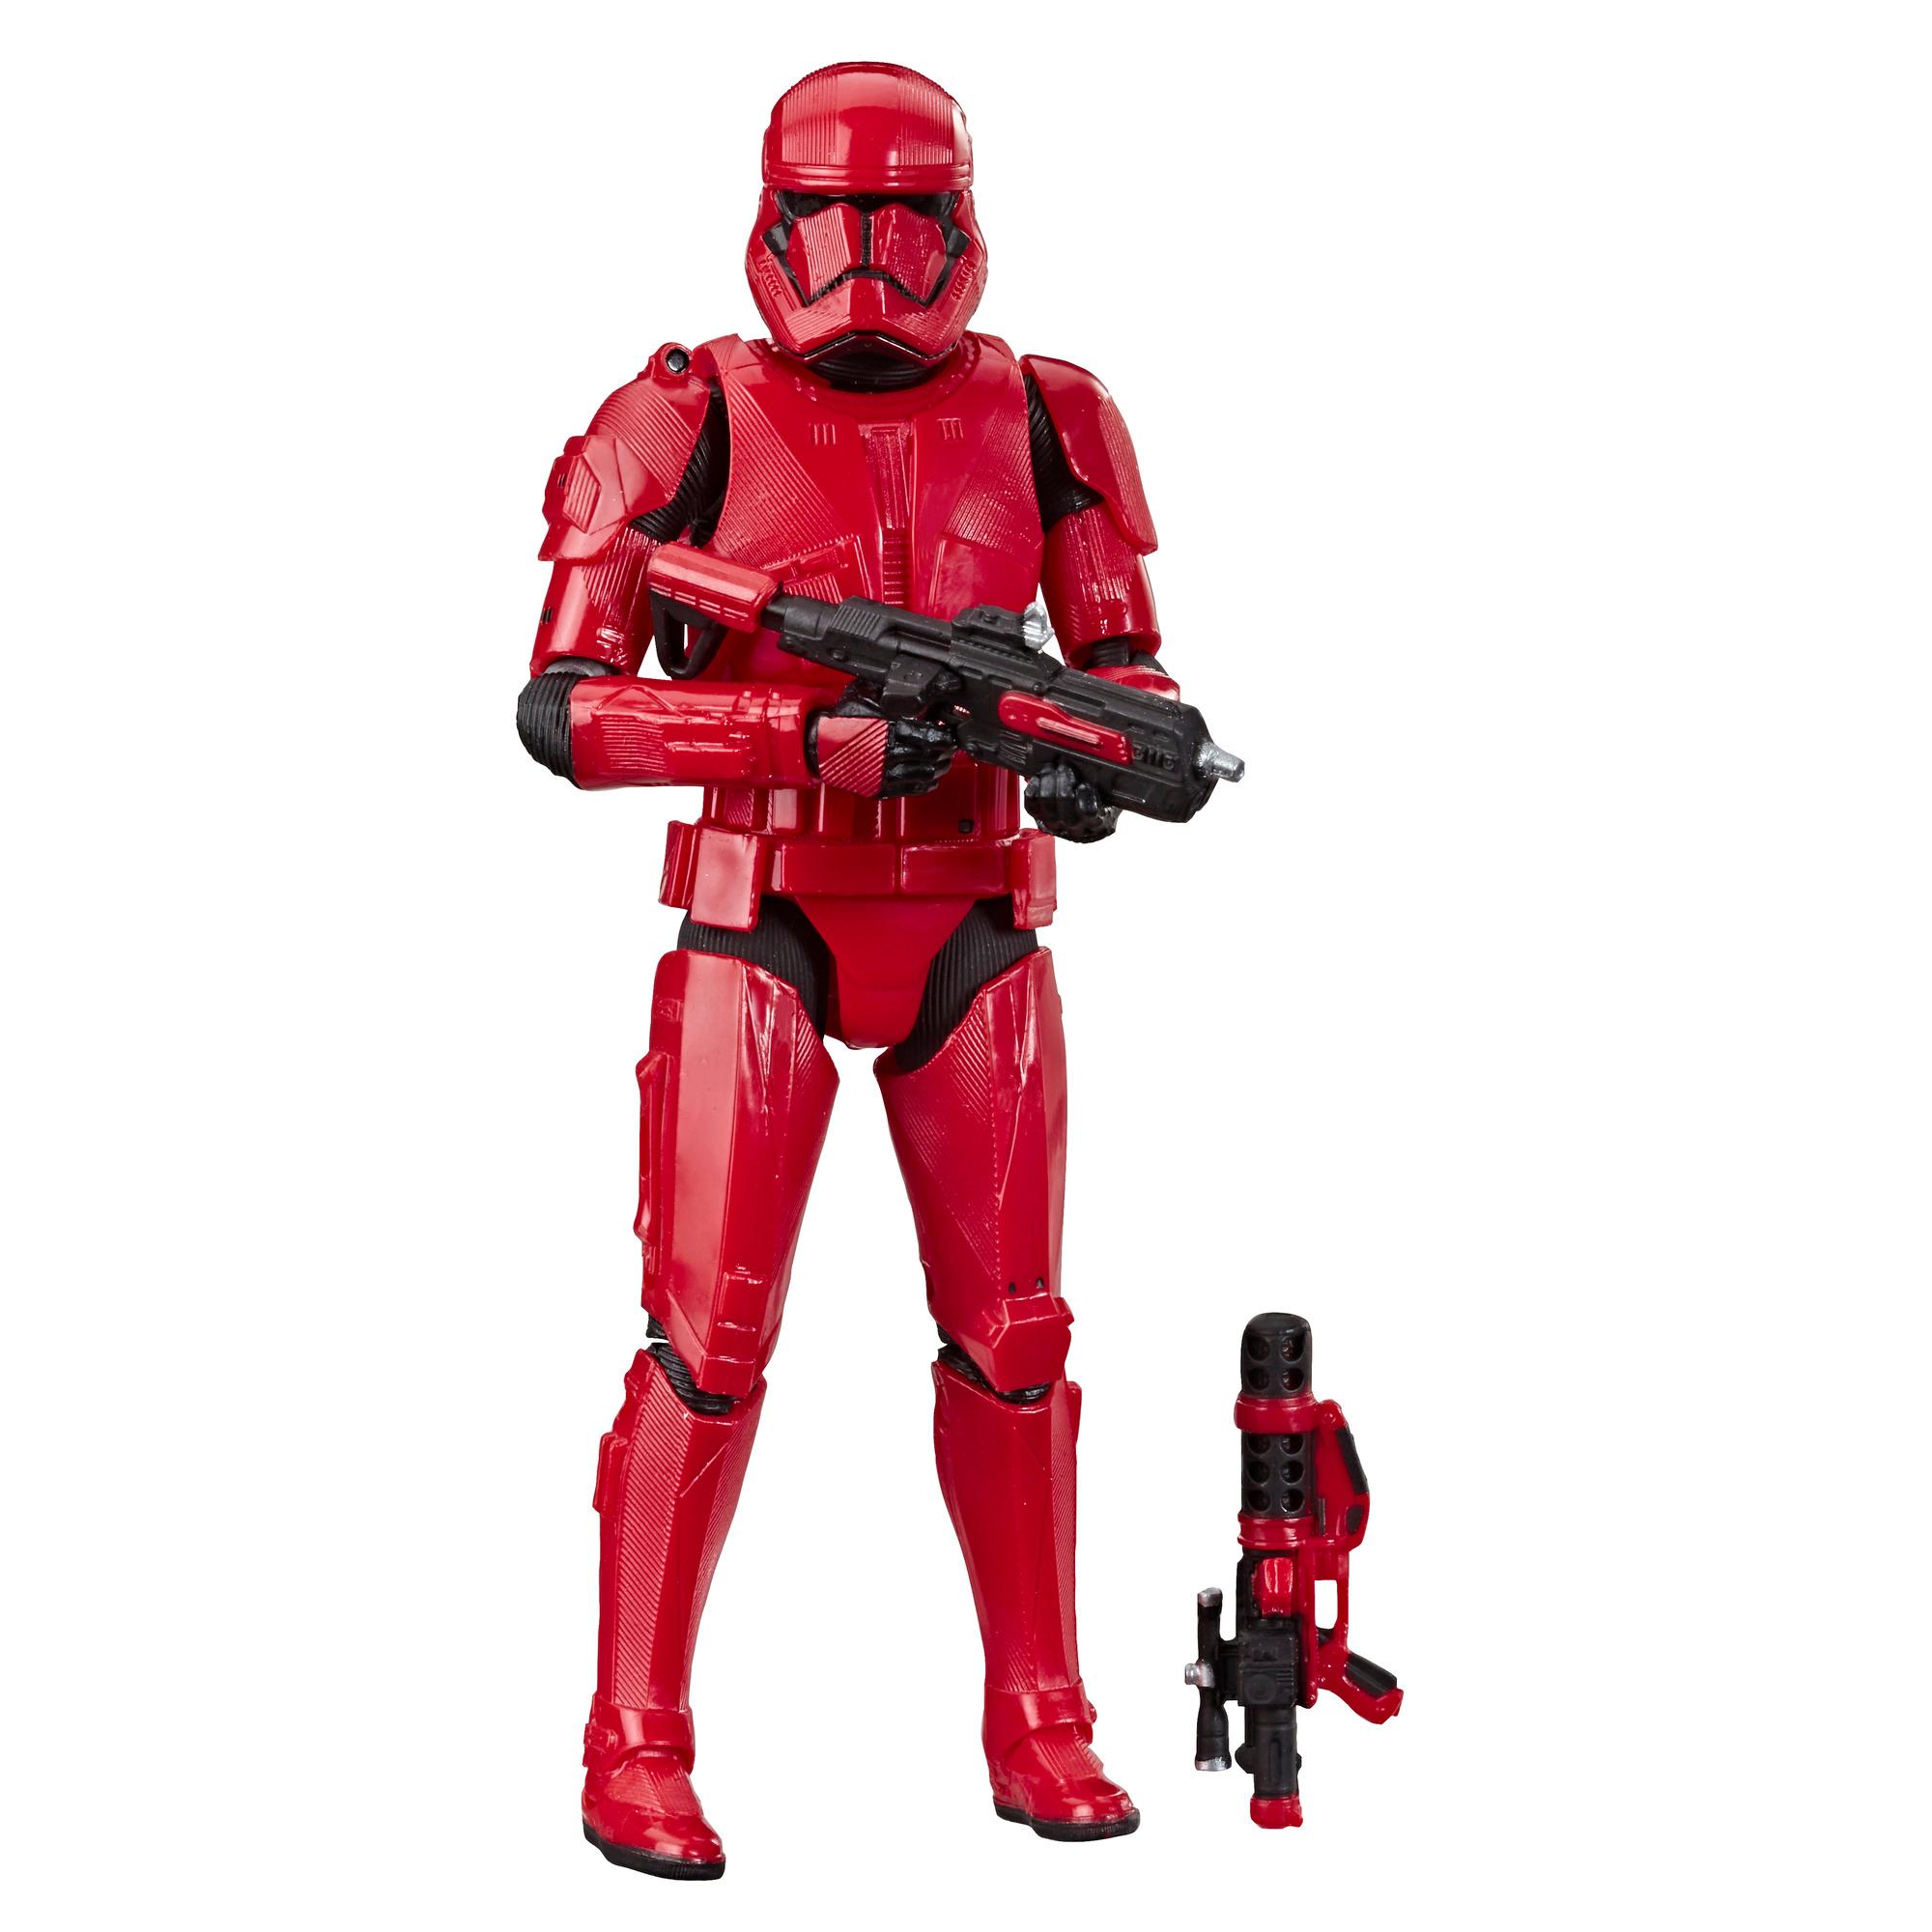 Star Wars The Black Series Sith Trooper Toy 6-inch Scale Star Wars: The Rise of Skywalker Action Figure, Ages 4 and Up